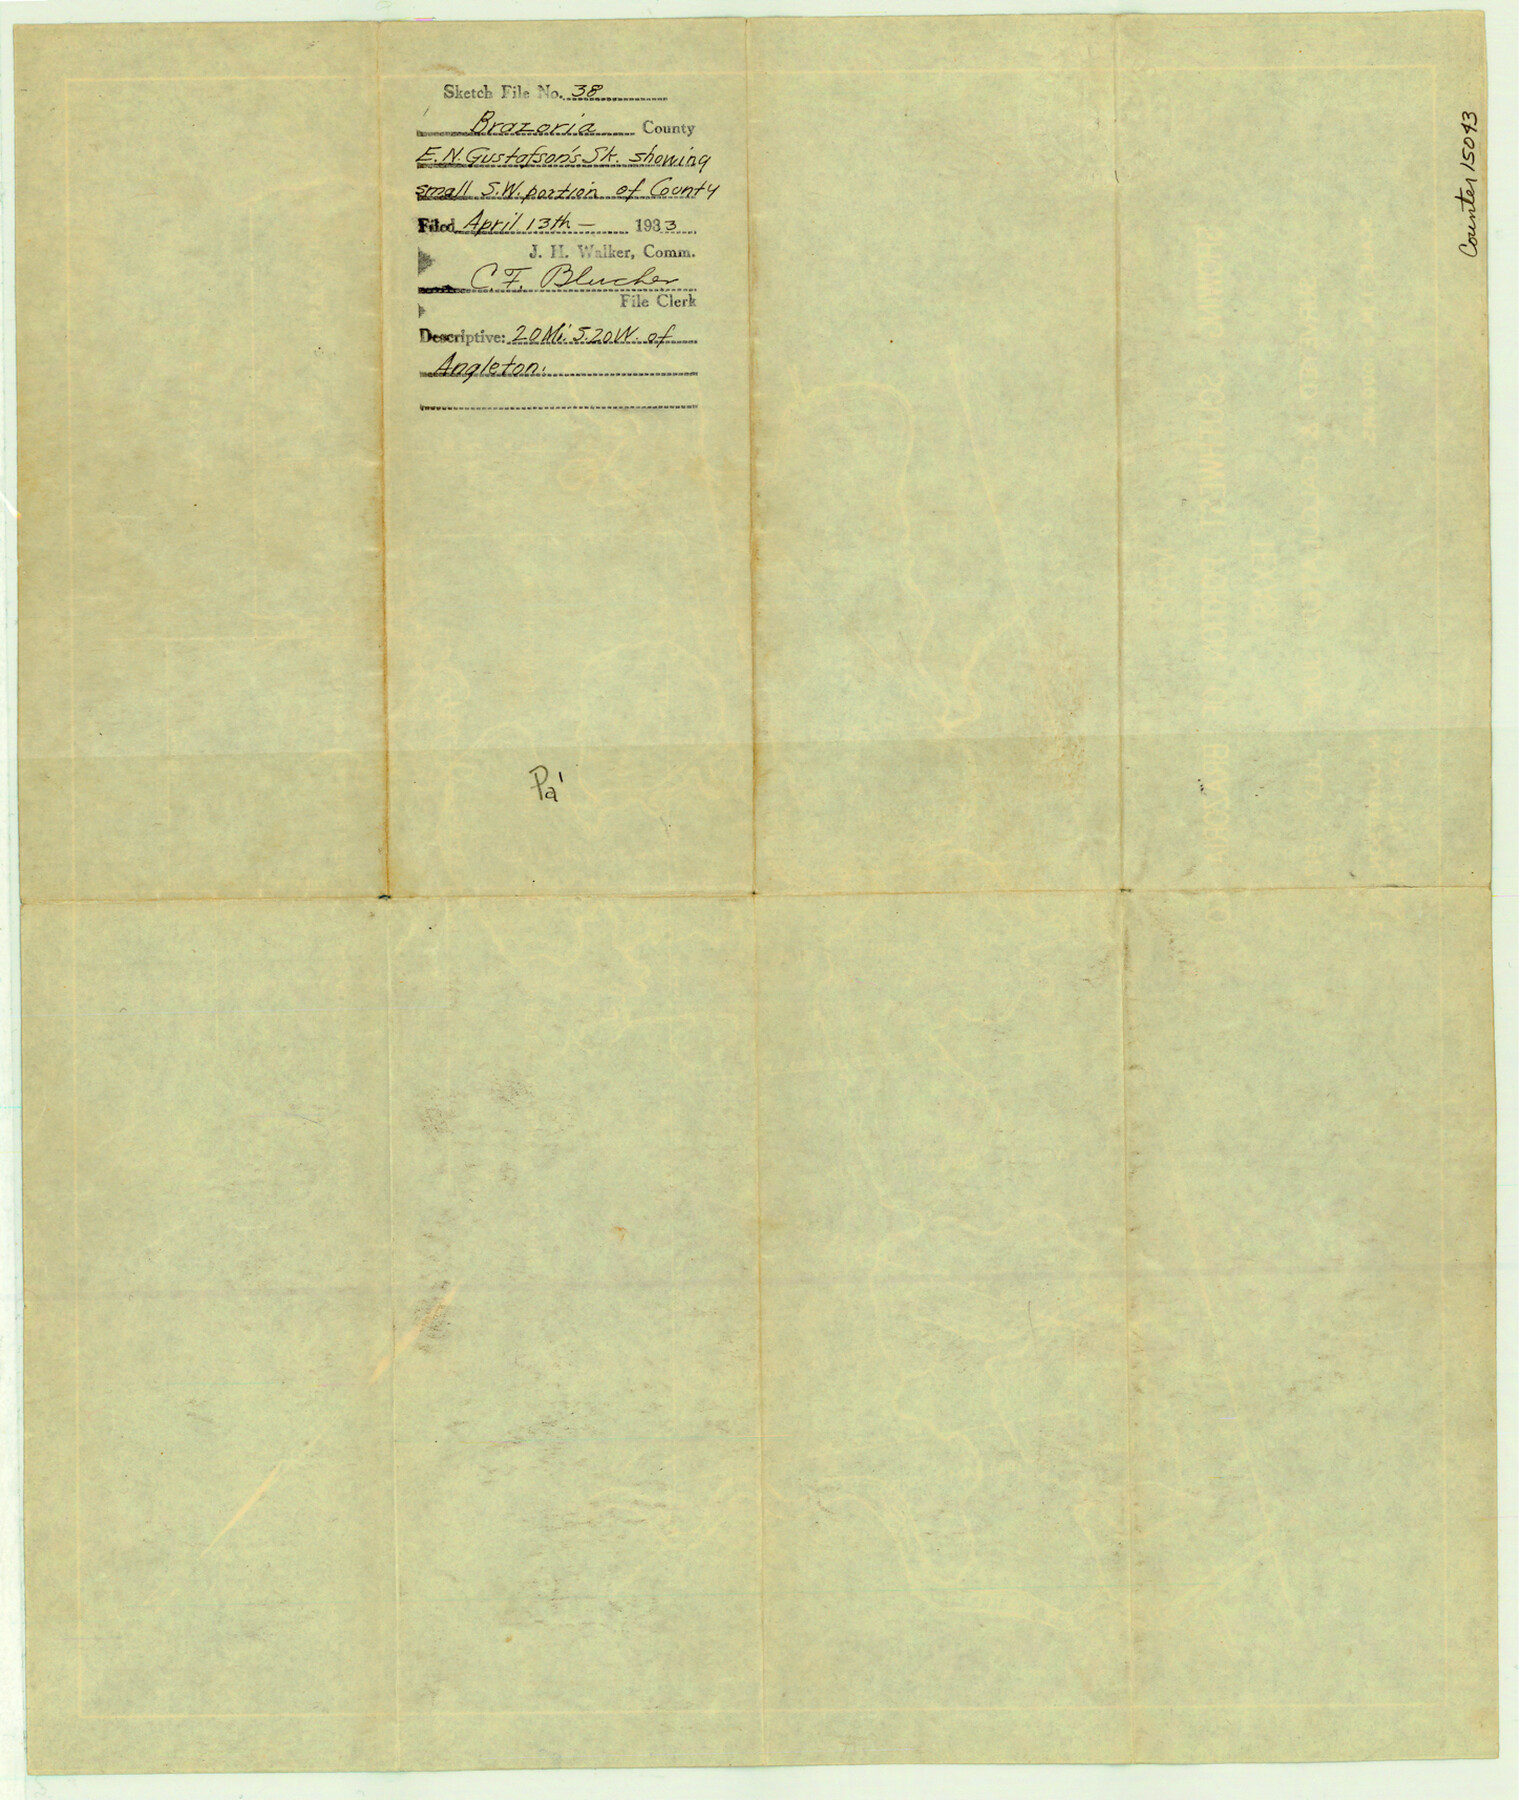 15043, Brazoria County Sketch File 38, General Map Collection